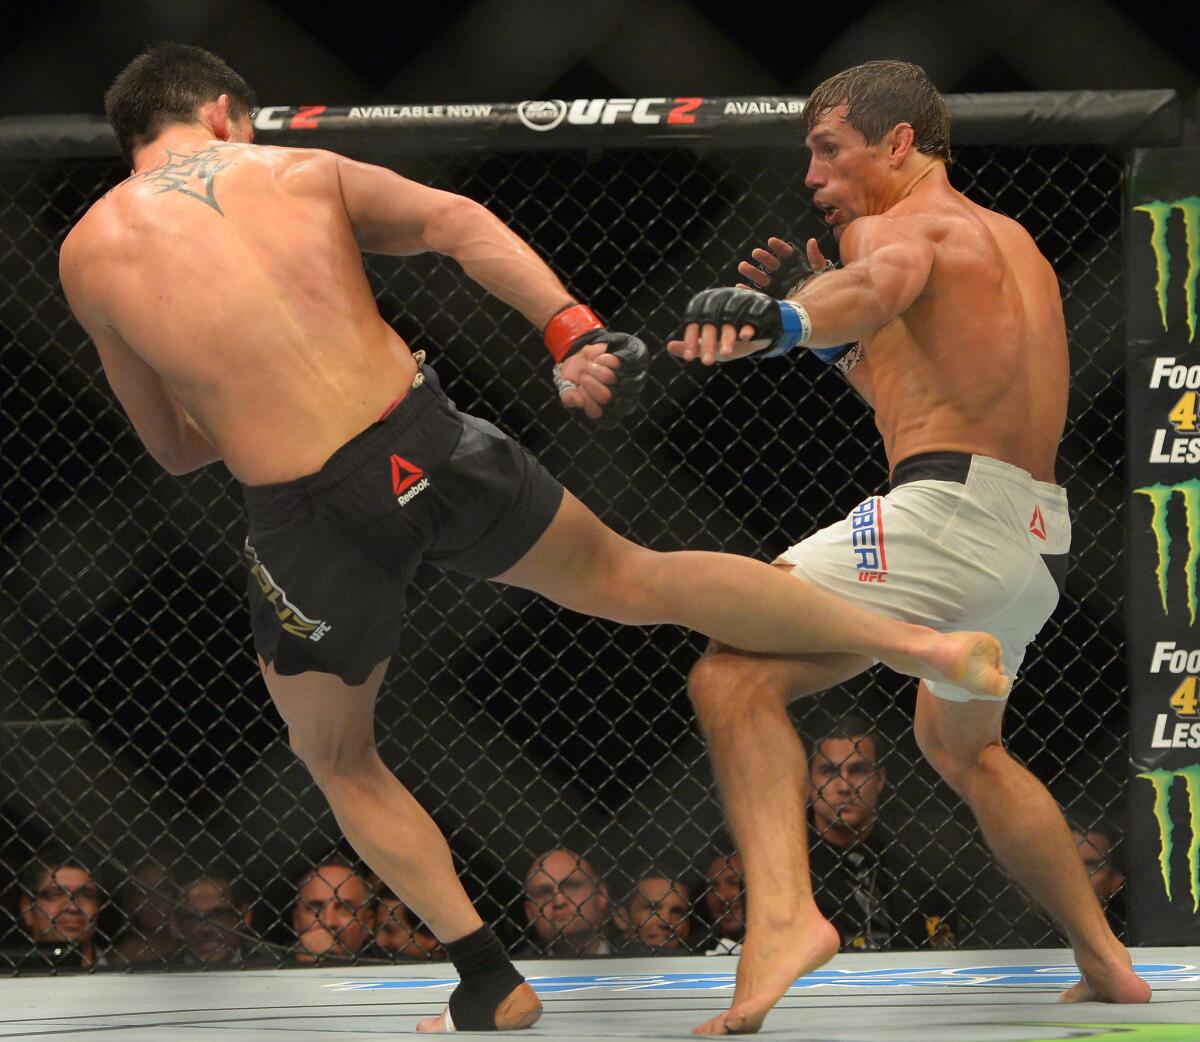 Dominick Cruz strikes with his right leg during the bantamweight title fight against Urijah Faber at UFC 199.